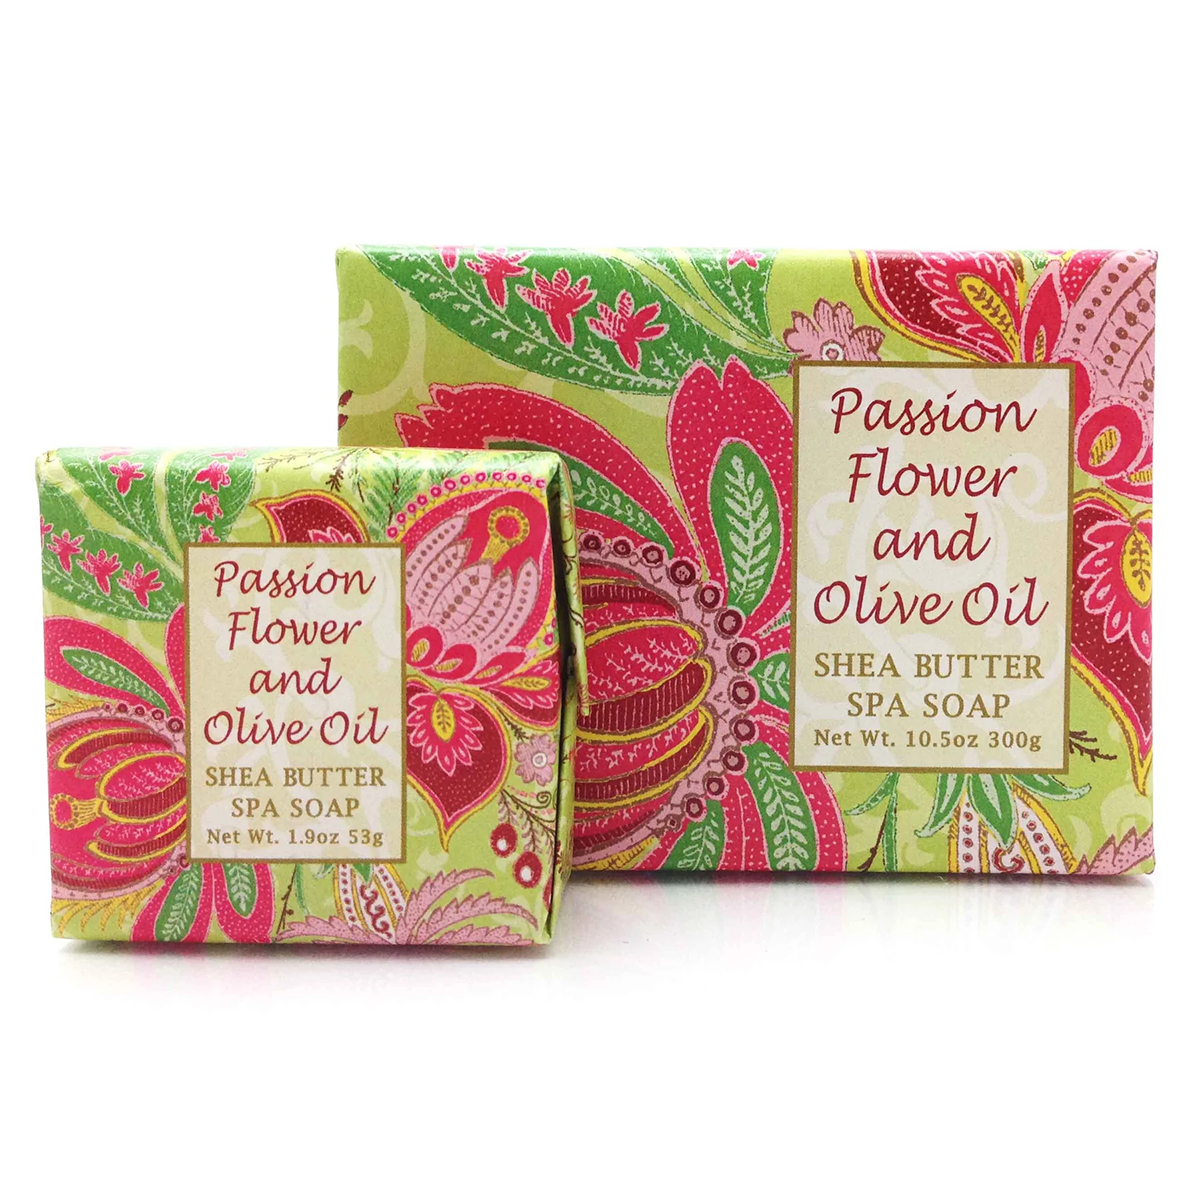 Passion Flower and Olive Oil Shea Butter Soap